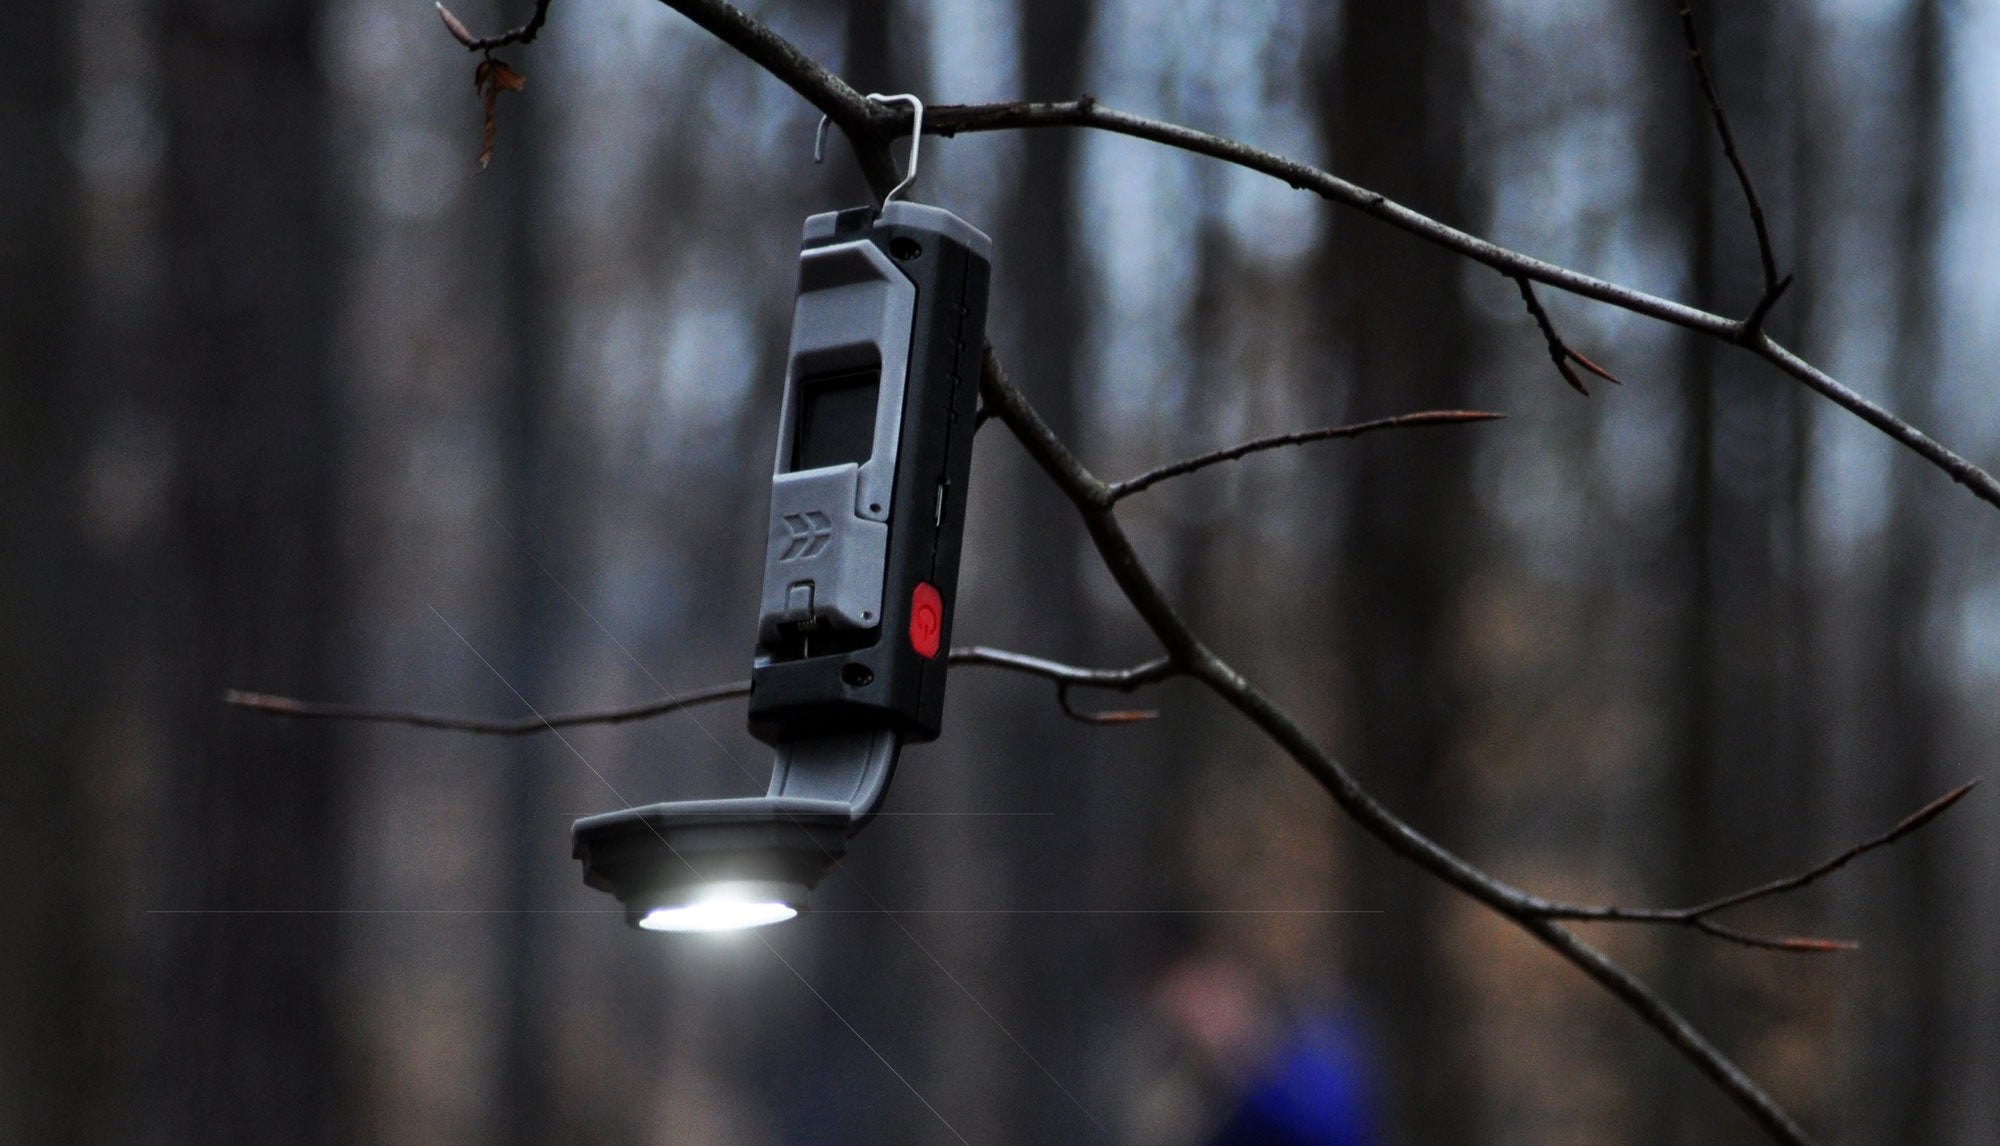 Use the FLEXIT Pocket Light hands-free with hanging hook like on a tree branch | STKR Concepts